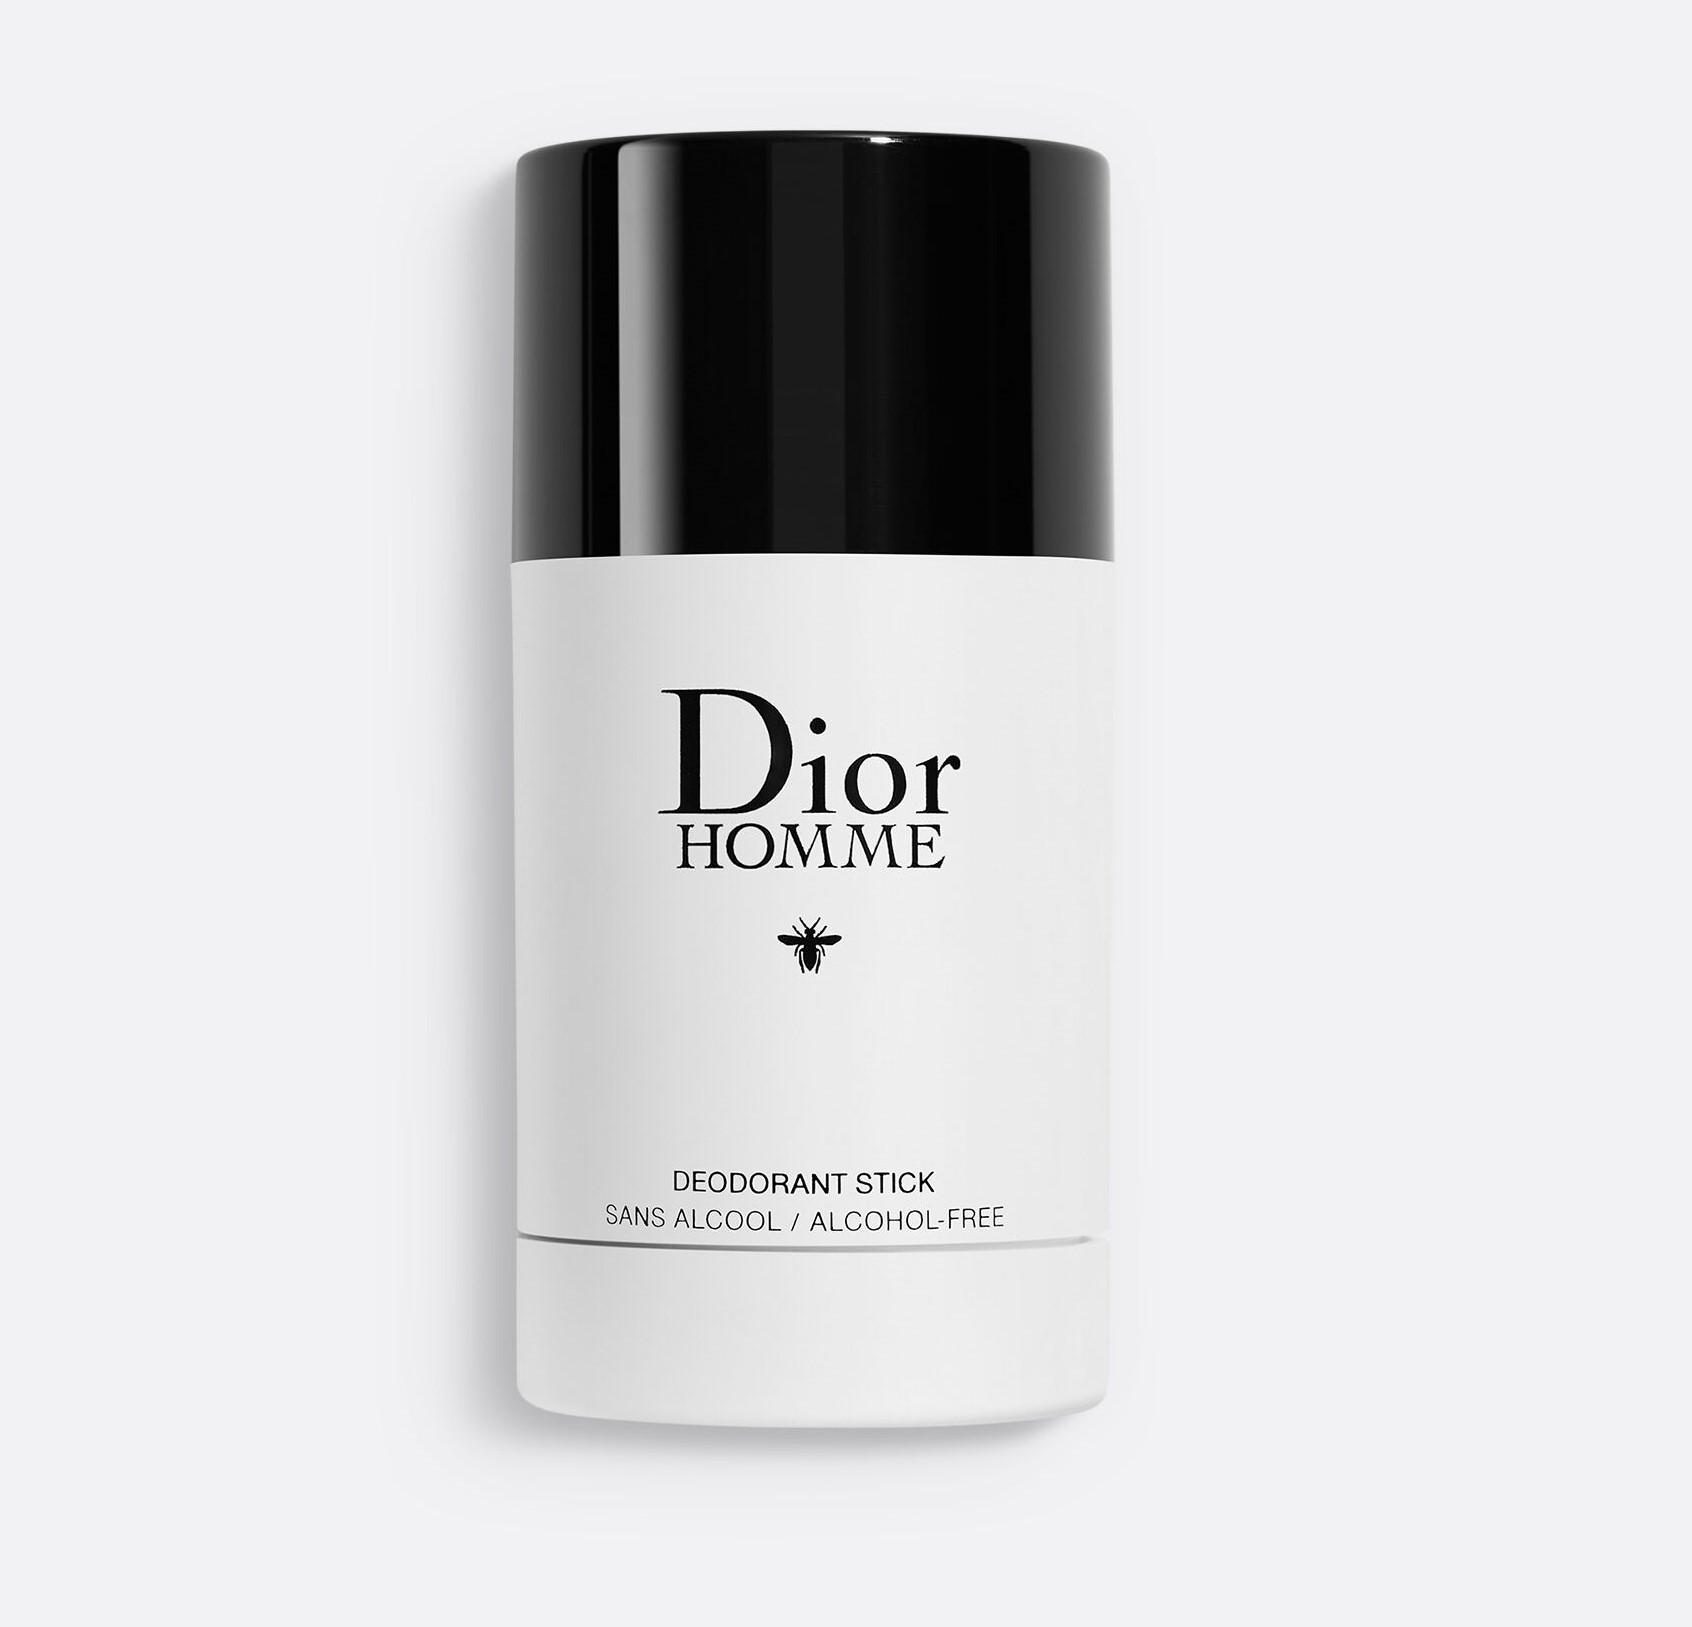 Dior Homme Deodorant Stick for Men by Dior